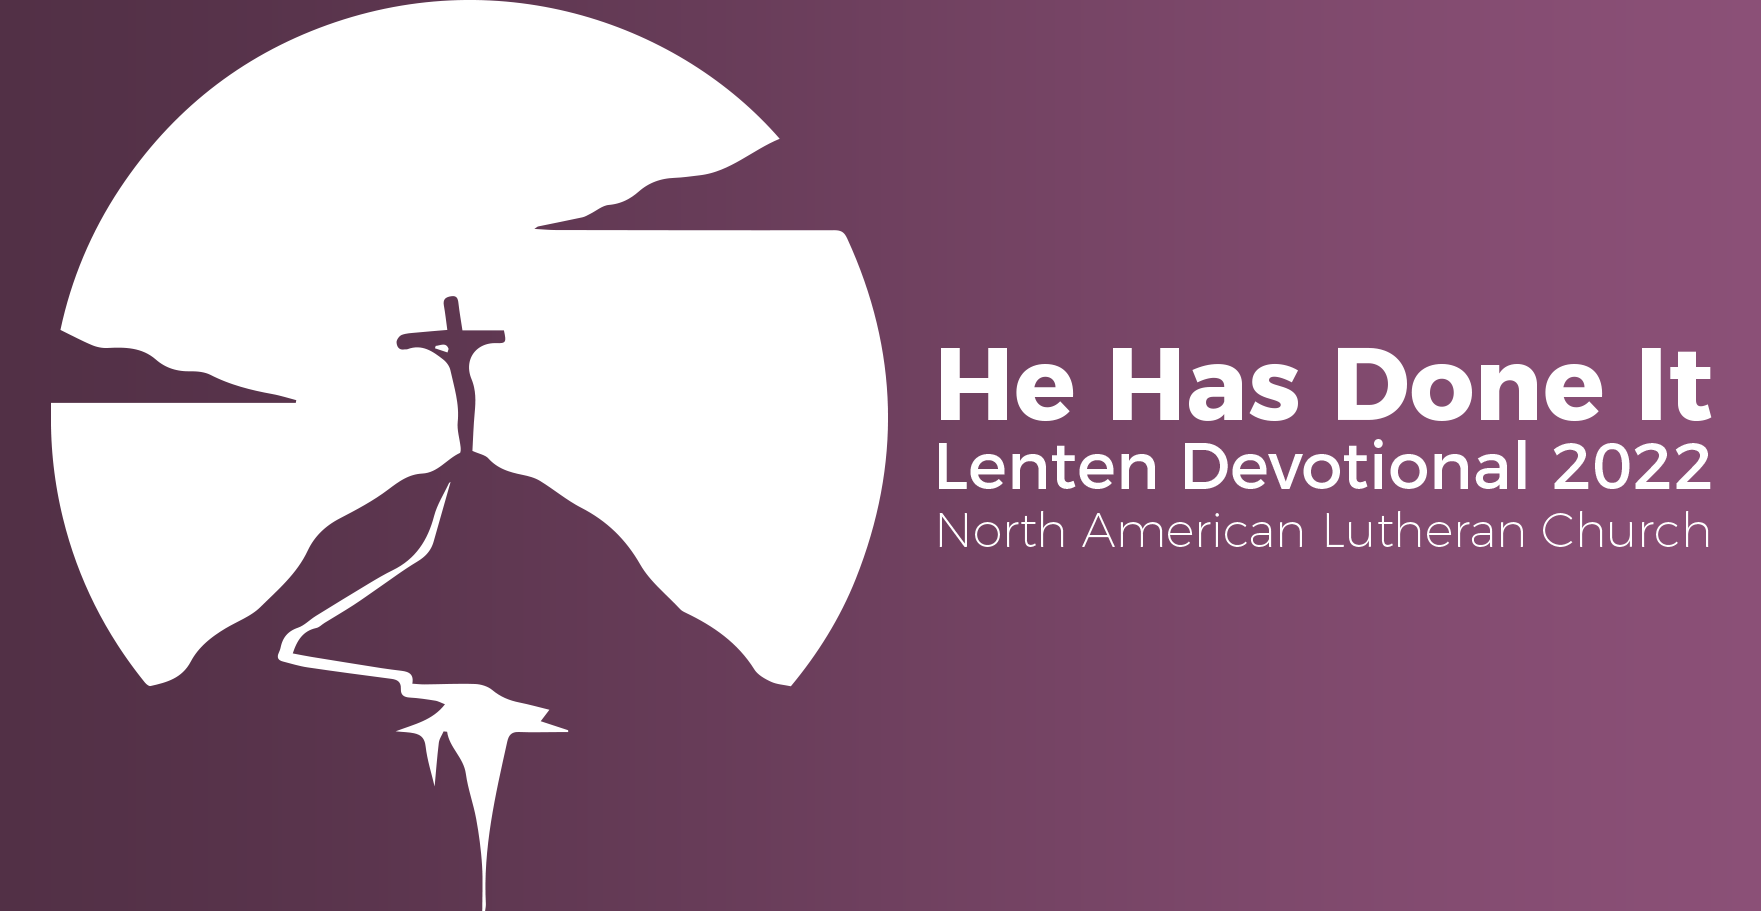 March 13, 2022 | The Second Sunday in Lent